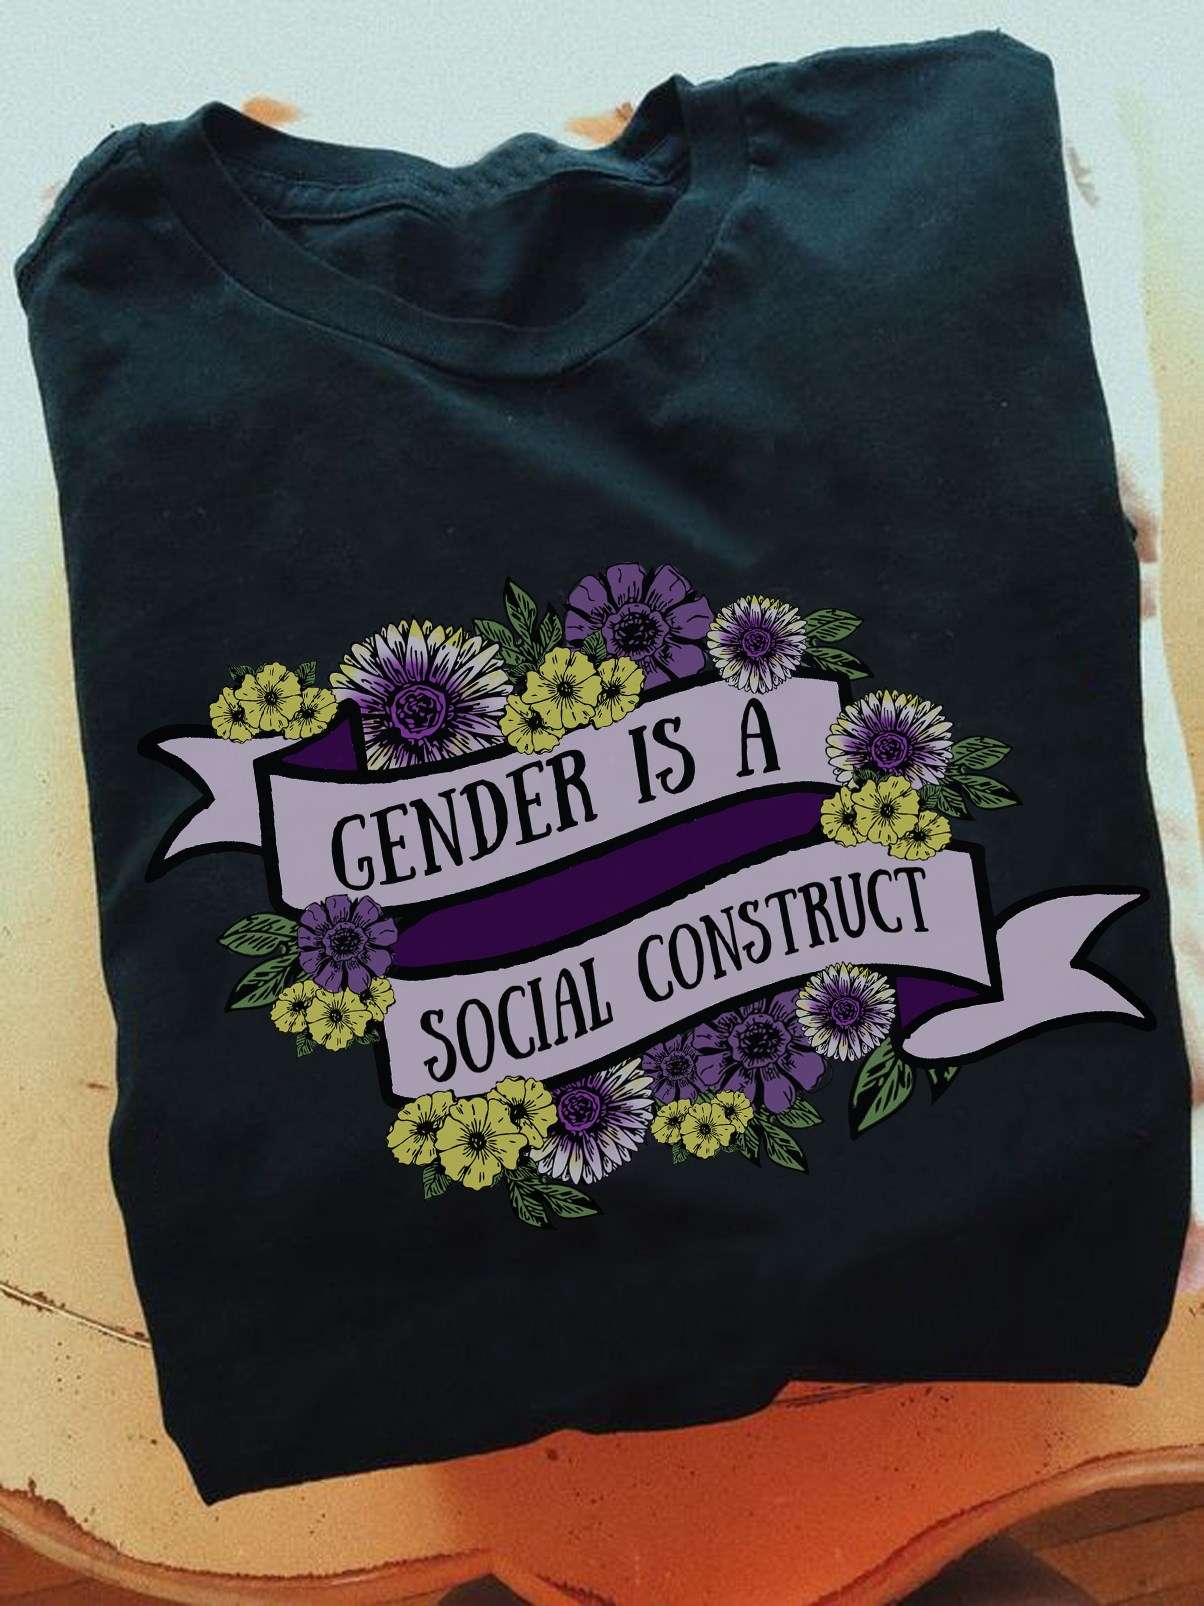 Gender is a social construct - Gender construct, gender in the society